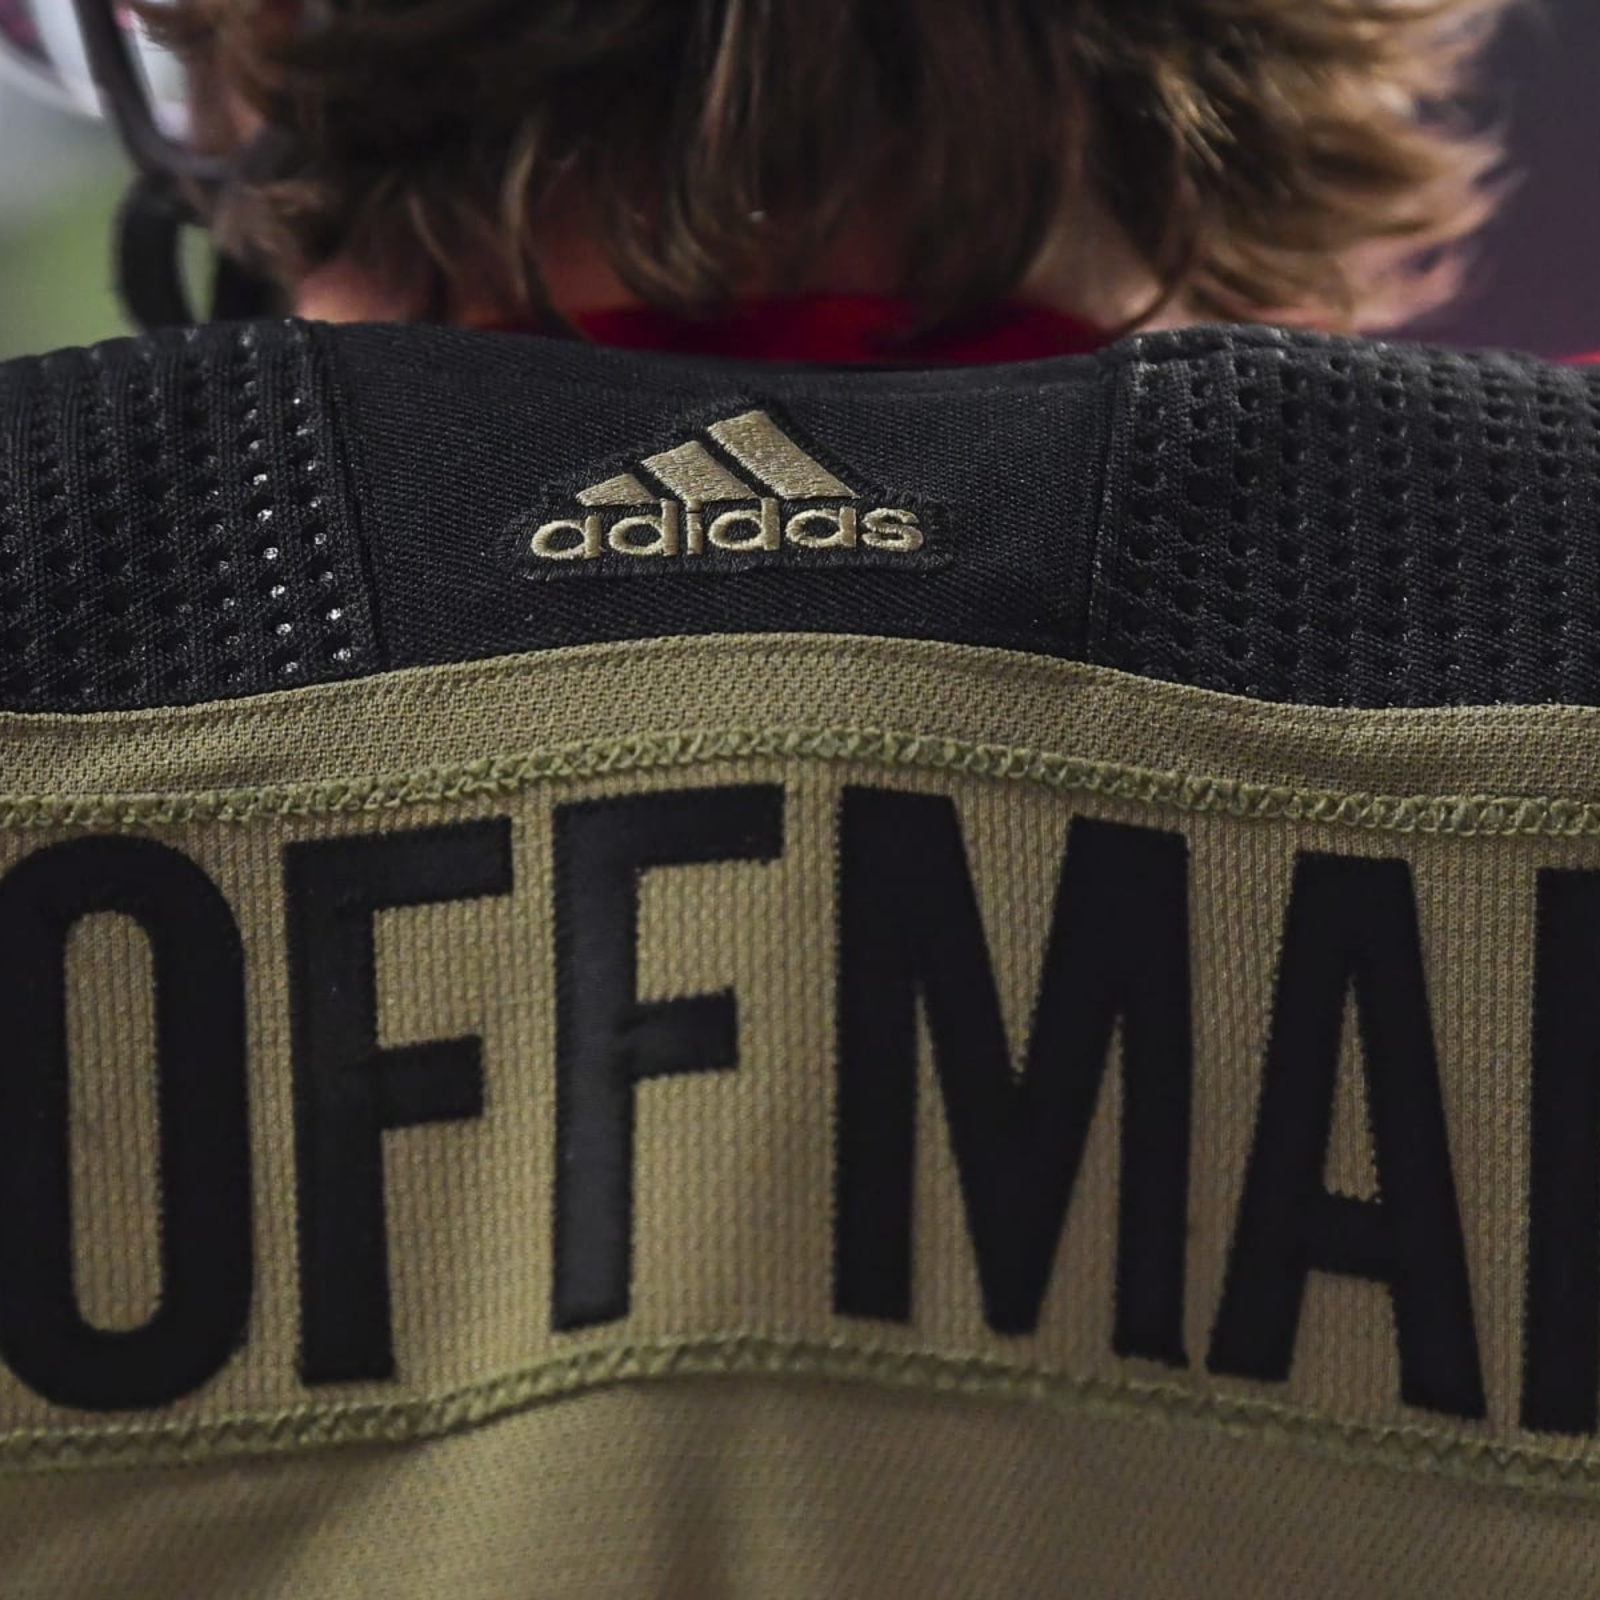 B/R Football on X: Adidas has ended its sponsorship deal with